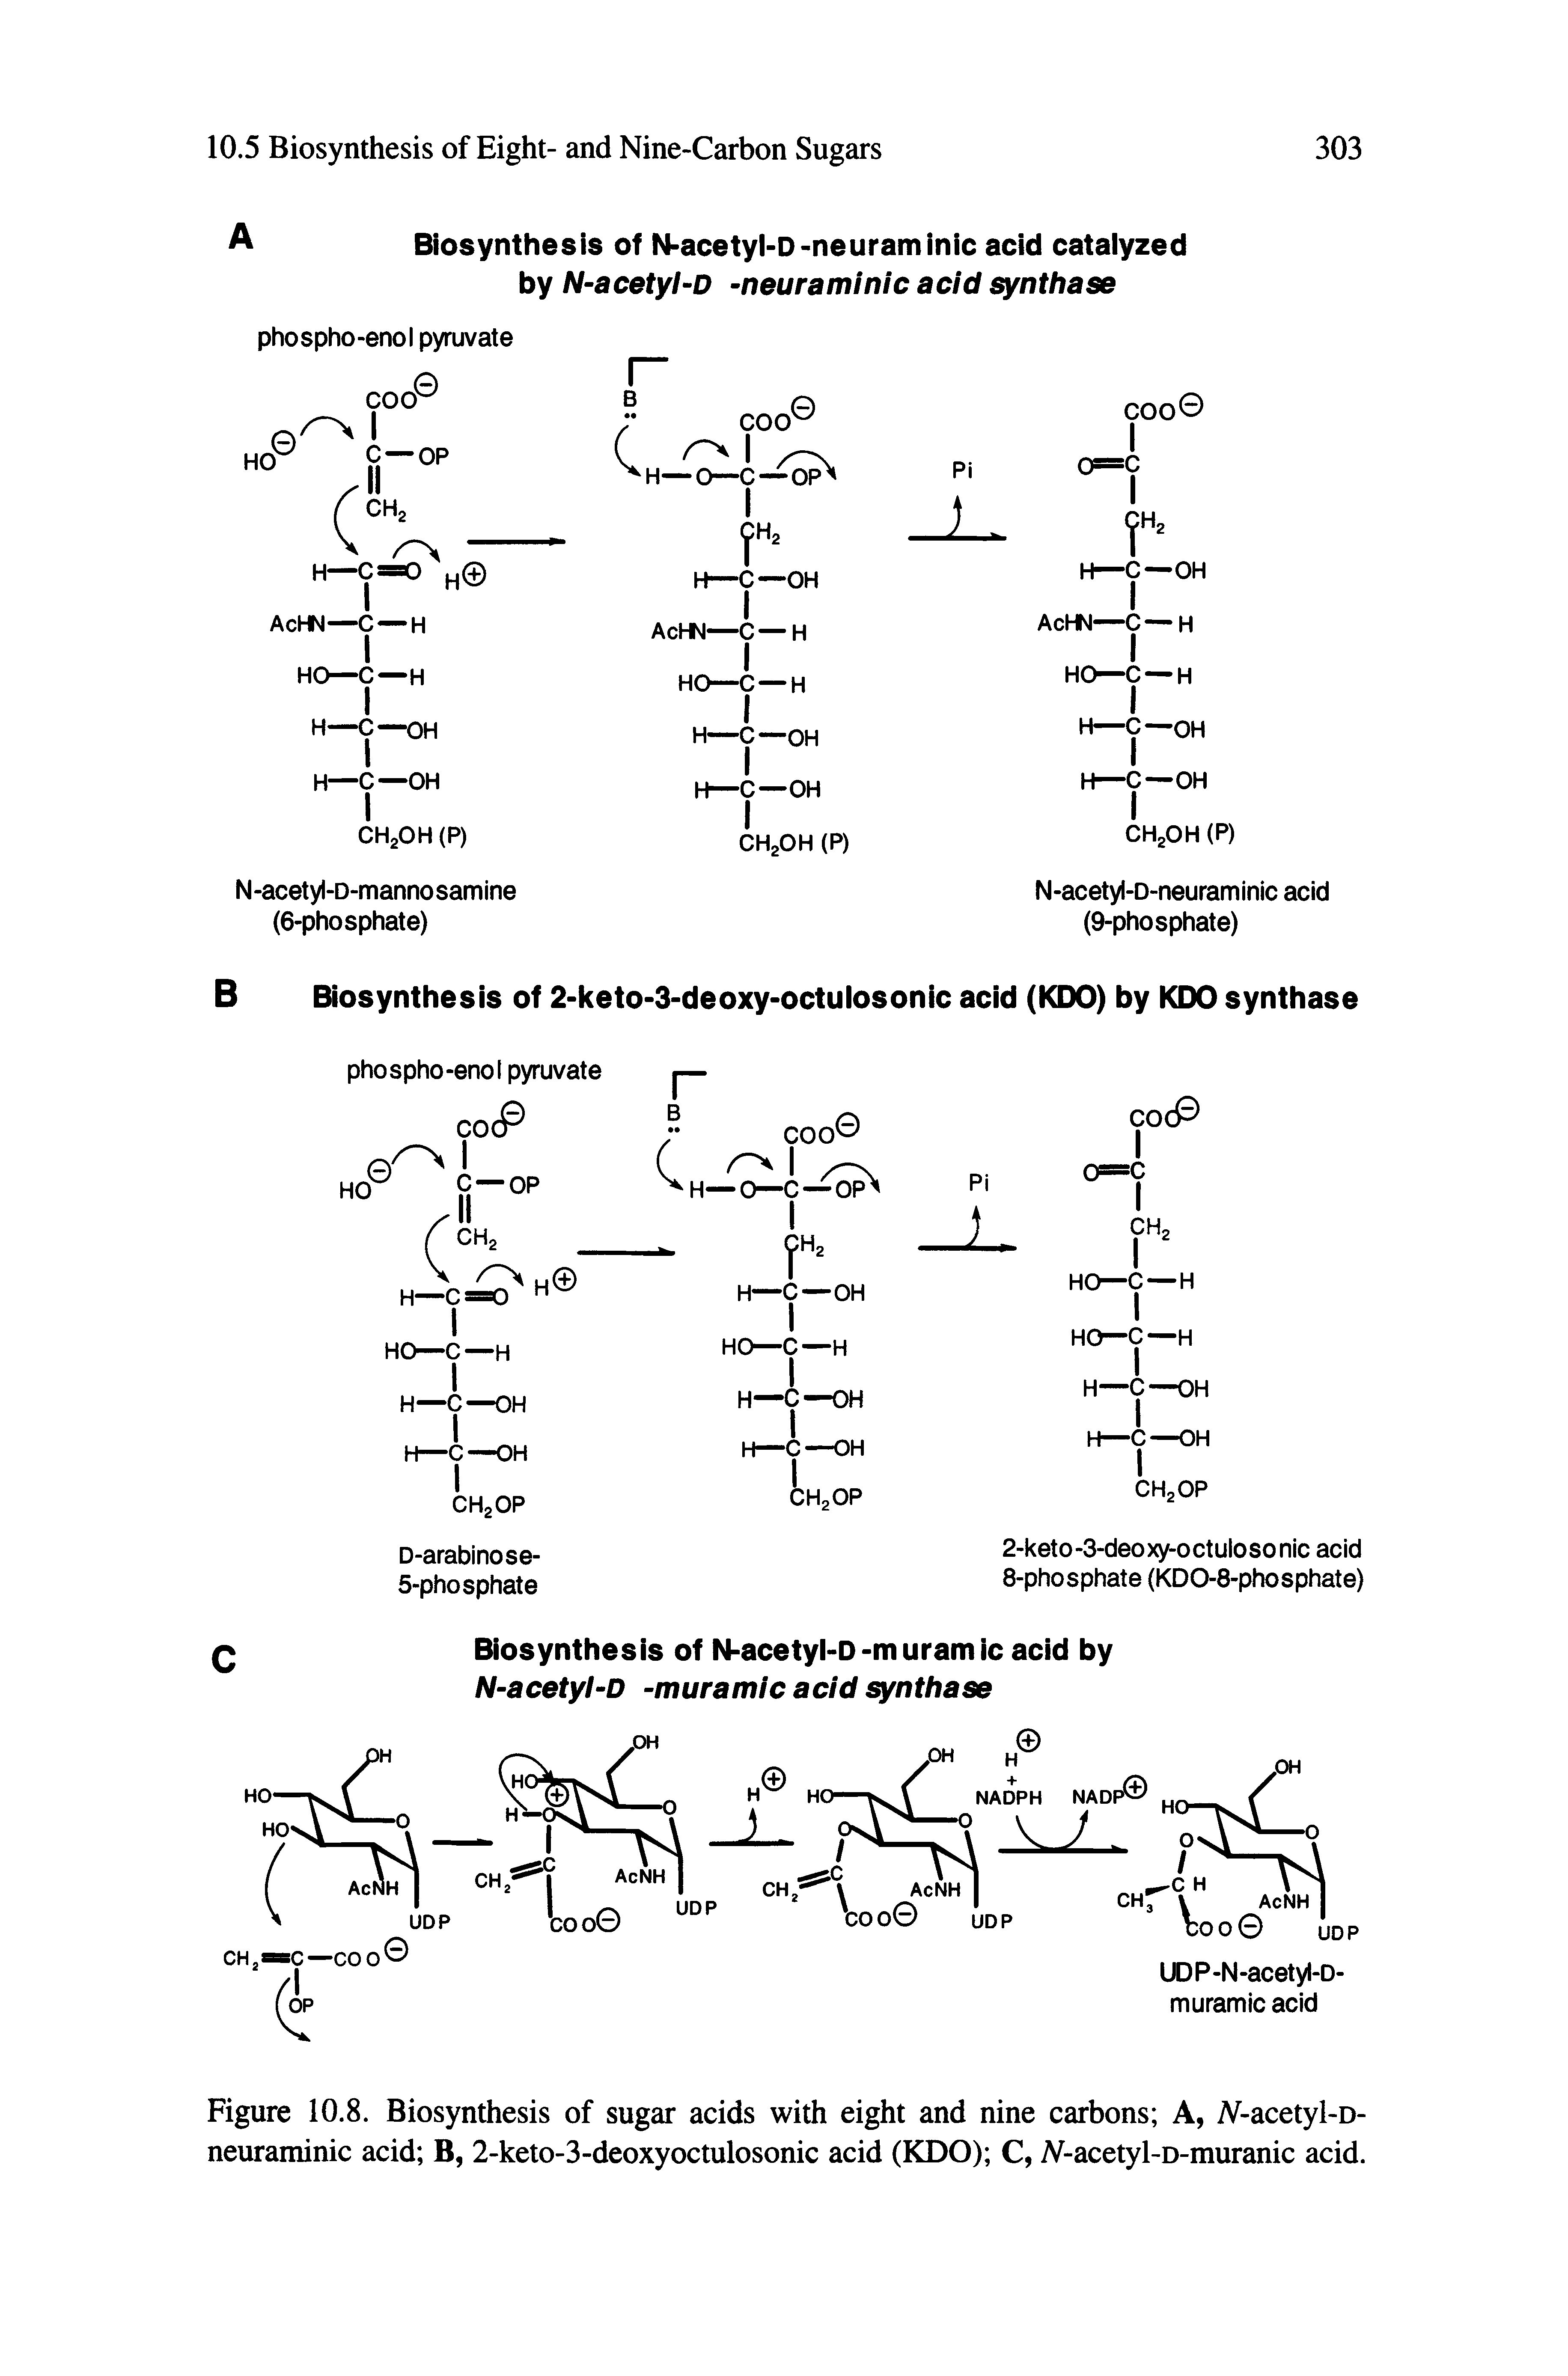 Figure 10.8. Biosynthesis of sugar acids with eight and nine carbons A, iV-acetyl-D-neuraminic acid B, 2-keto-3-deoxyoctulosonic acid (KDO) C, A acetyl-D-muranic acid.